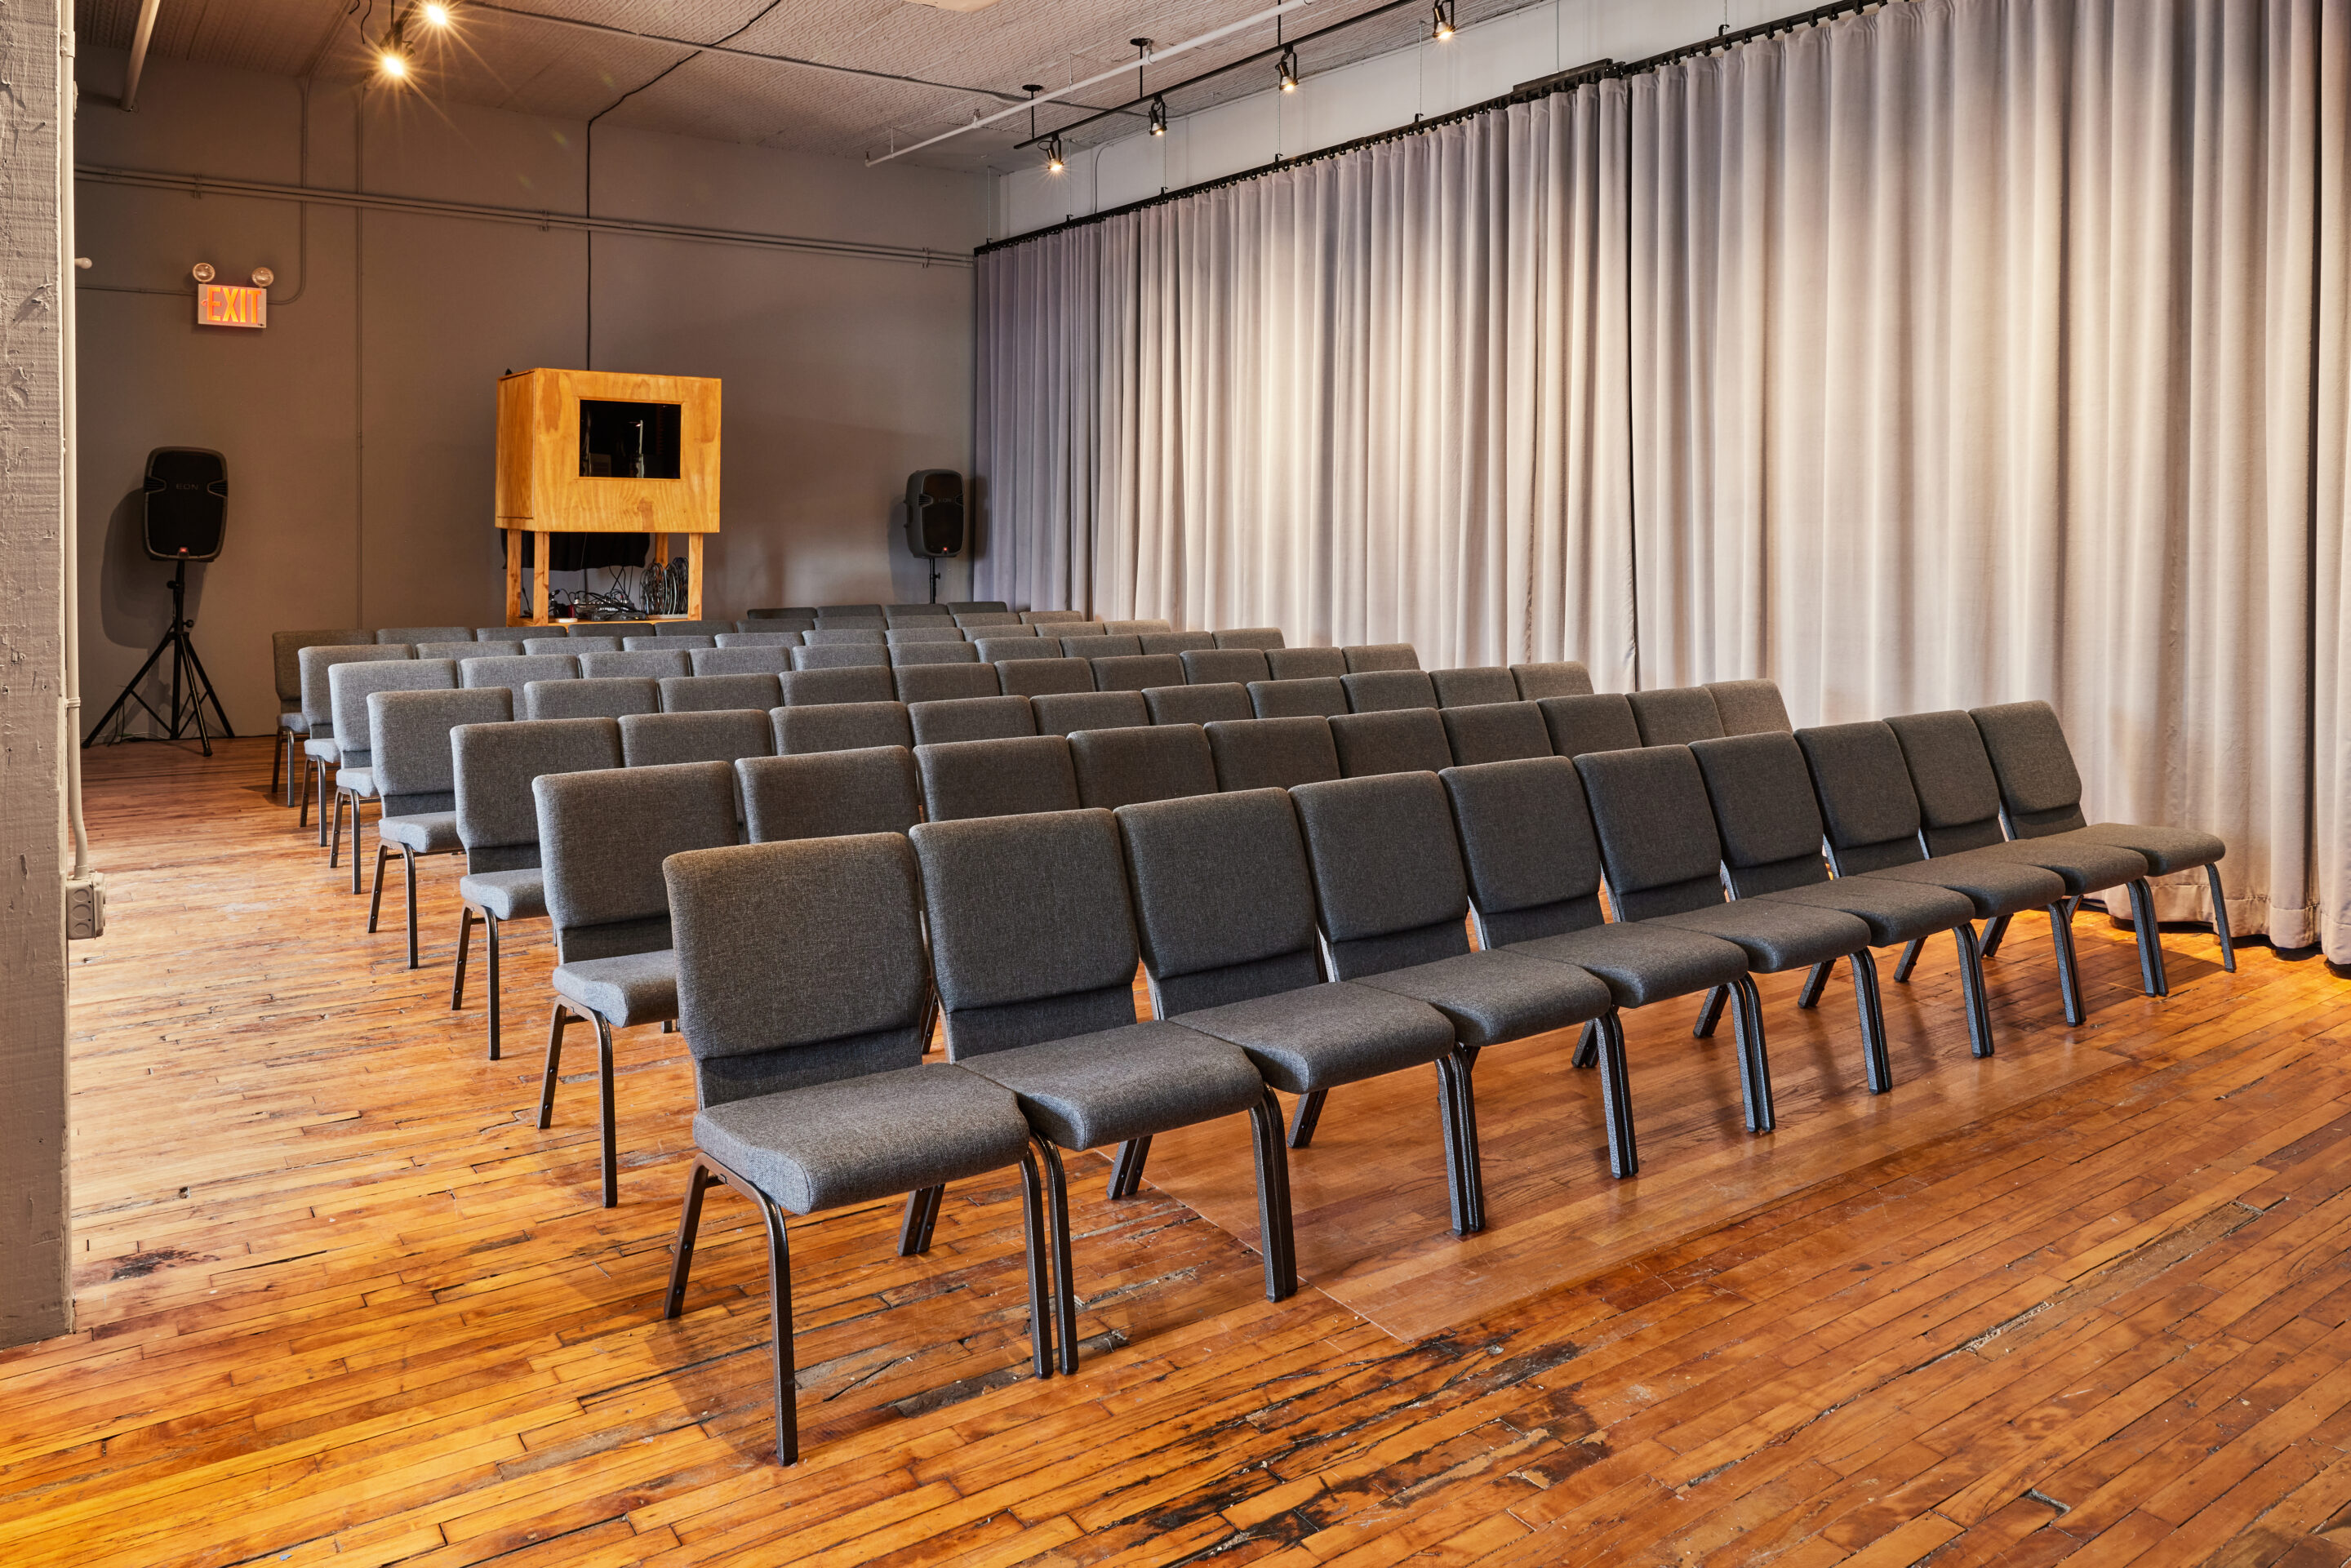 Casa Kino Event Space with rows of chairs and projector